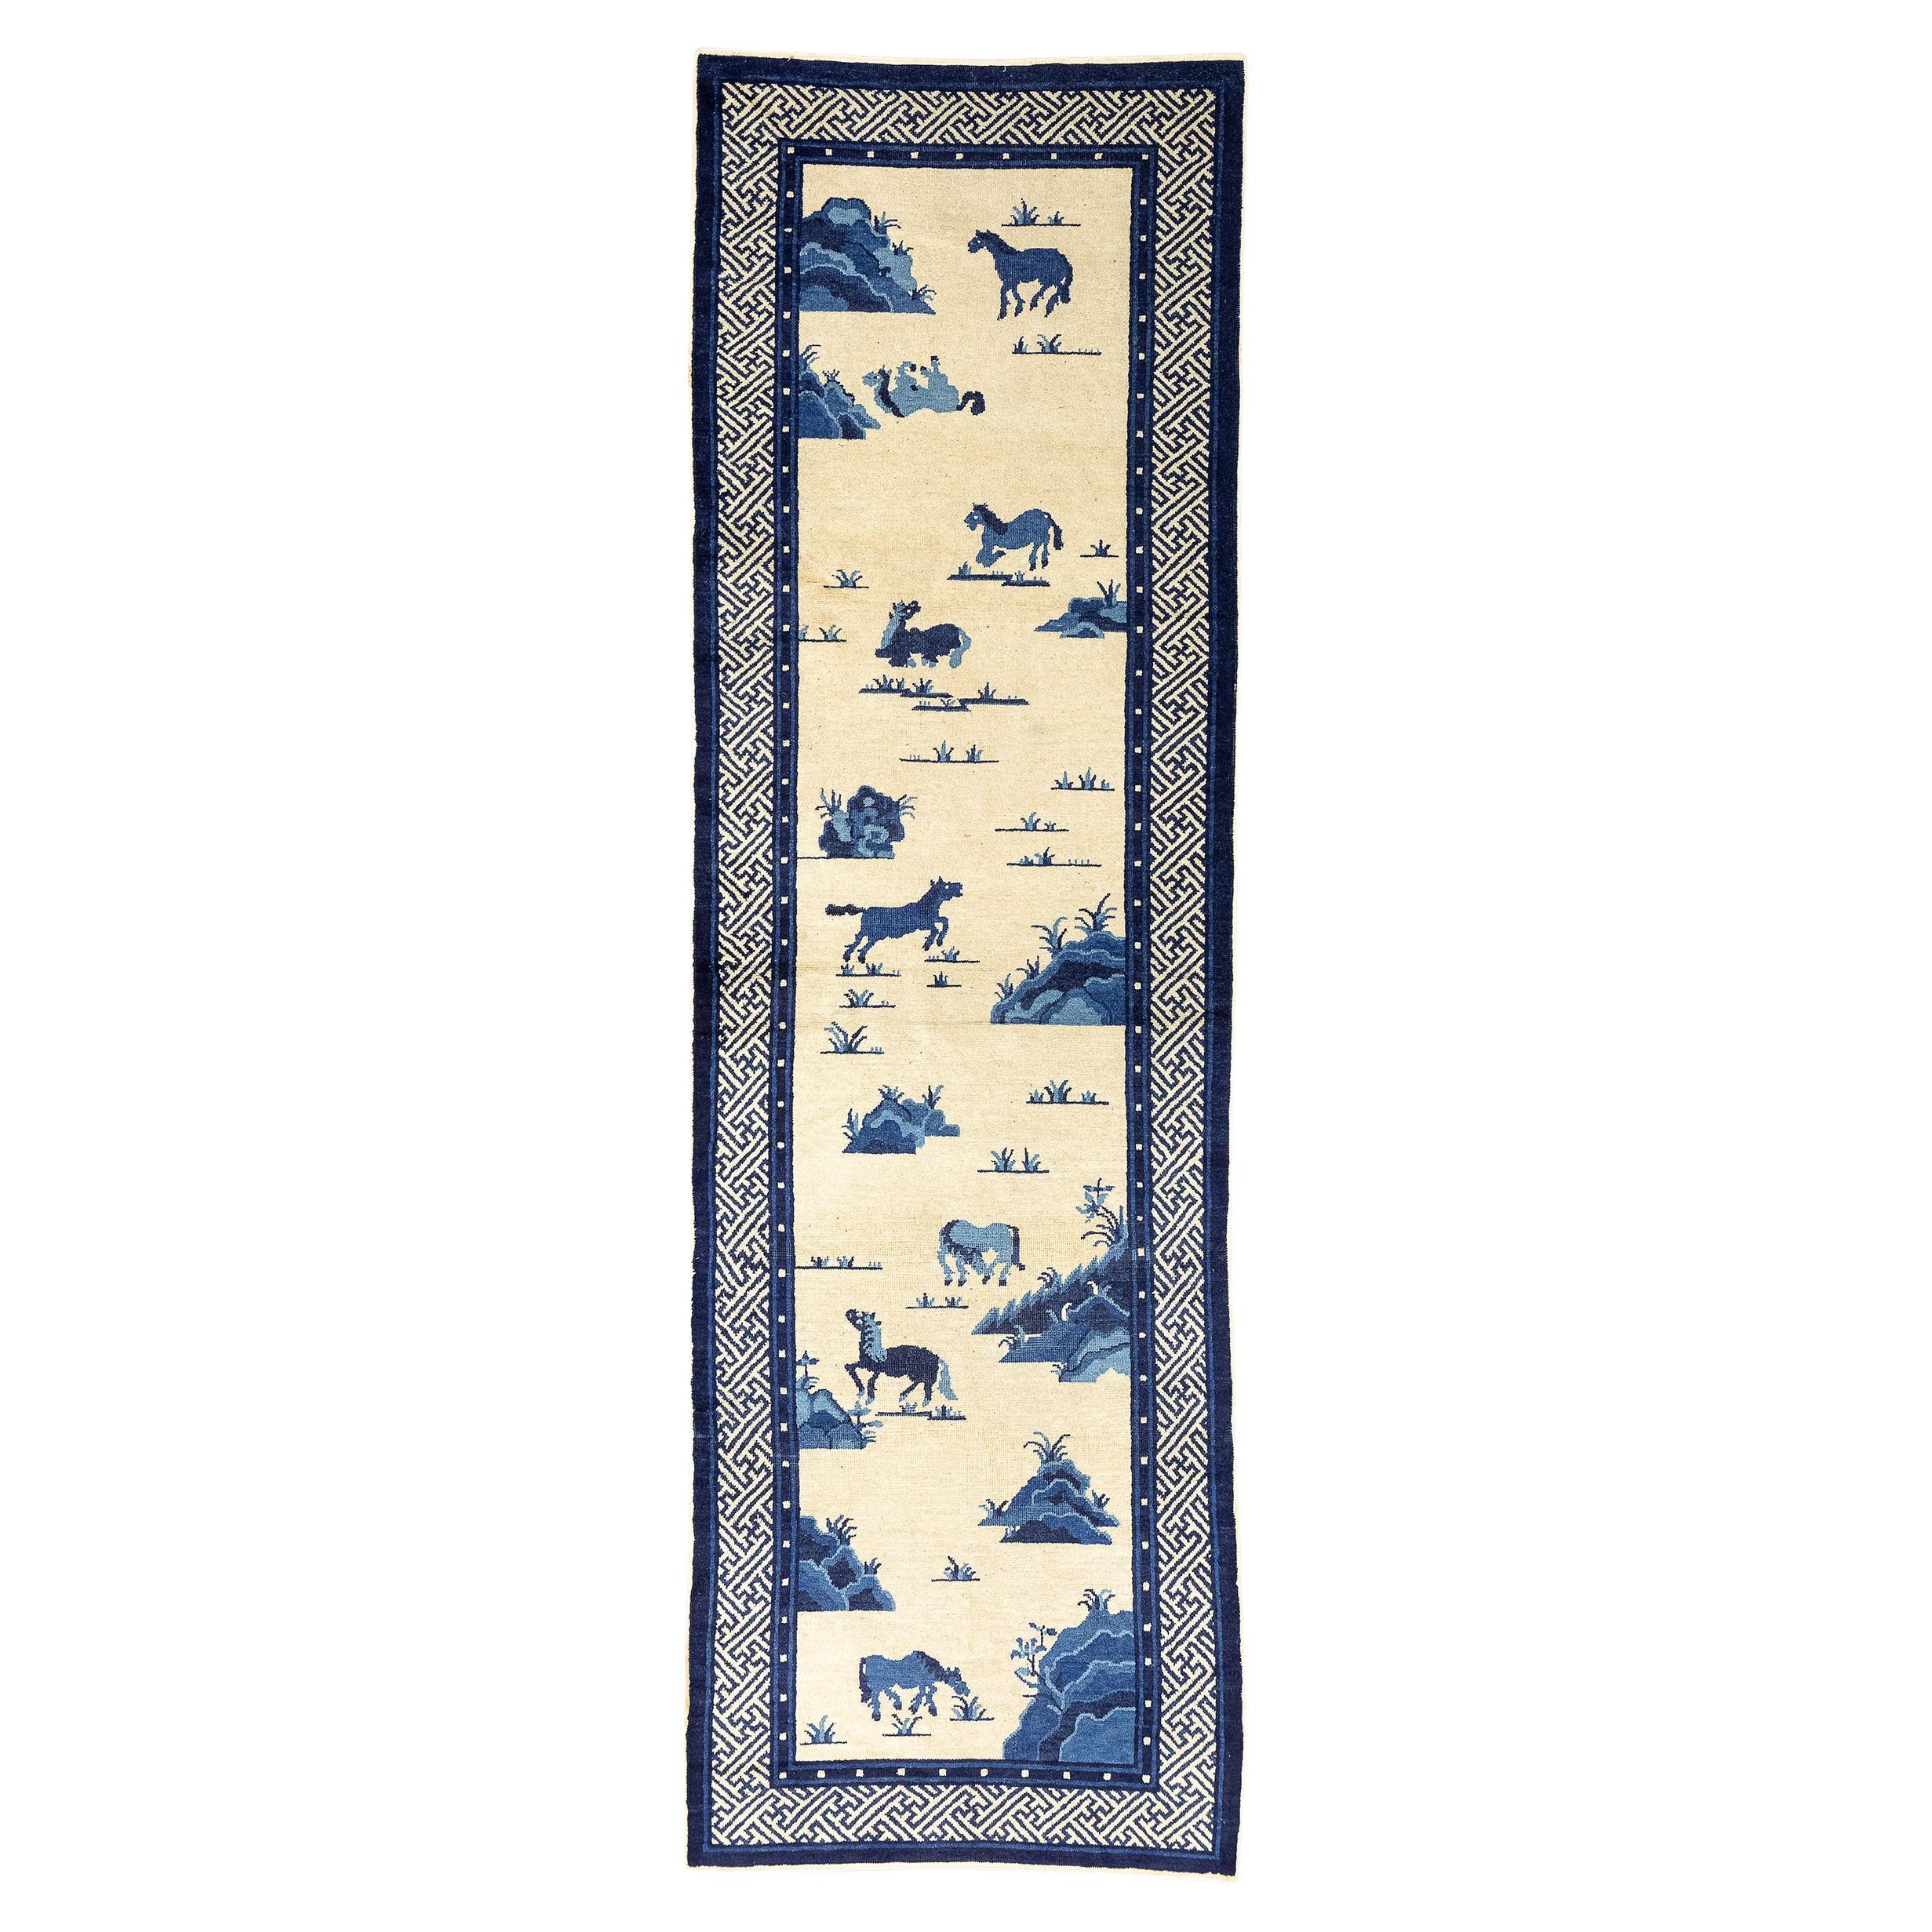 Chinese Rug “Eight Horses 'Bajun tu'” Design, Early 20th Century For Sale